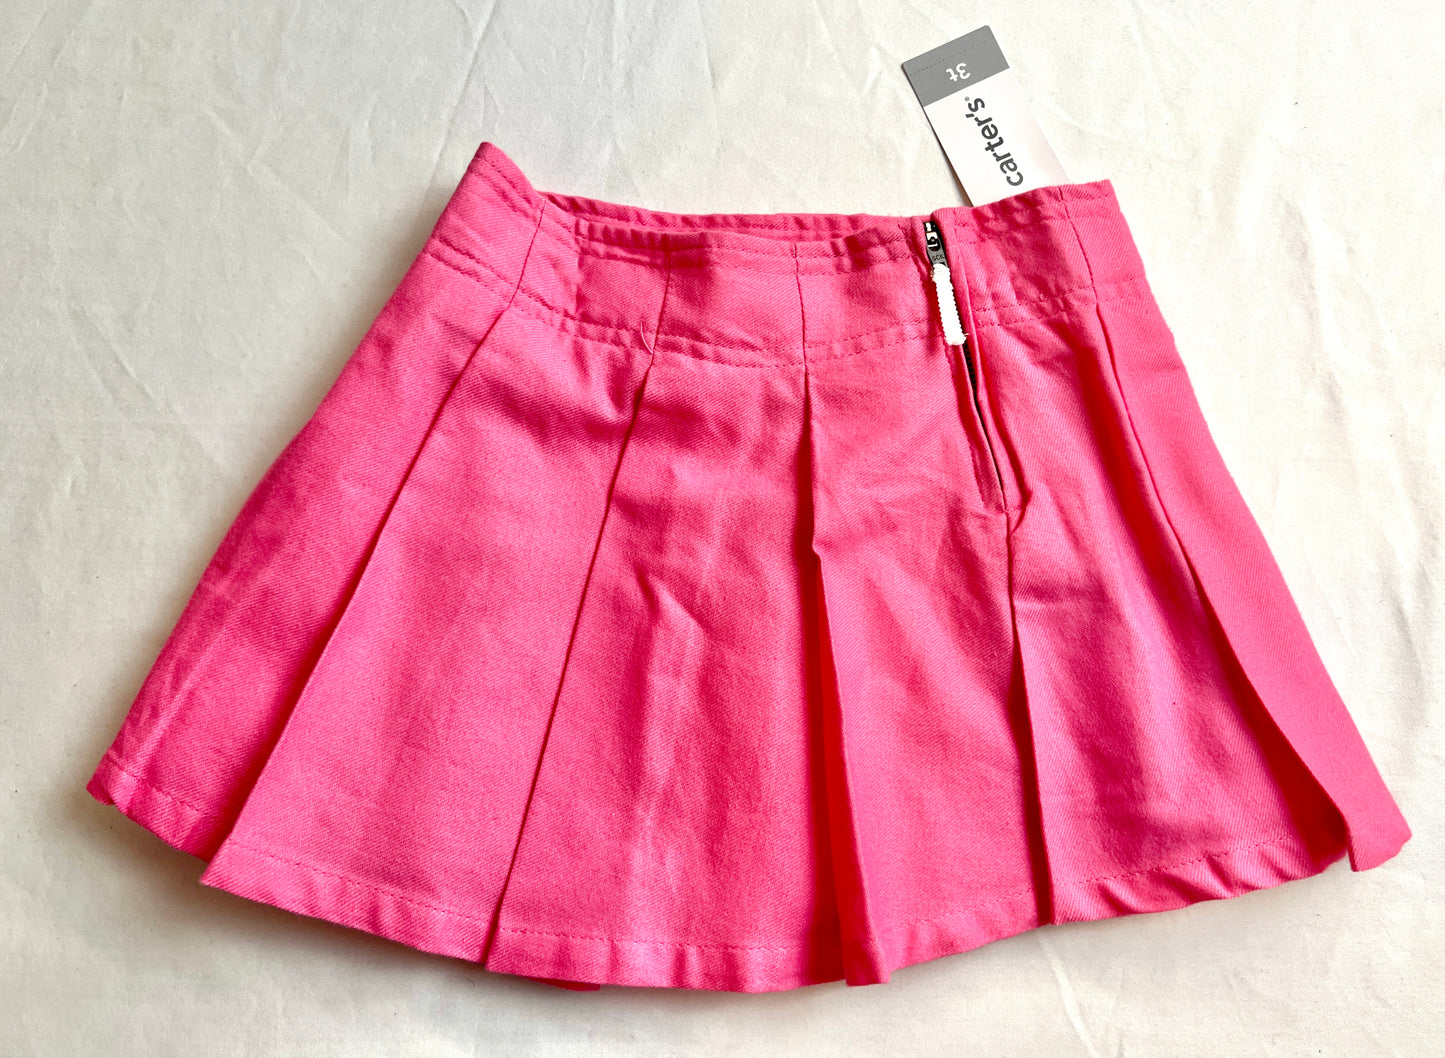 Girls 3T NEW NWT Pink Zip Up Pleated Skirt